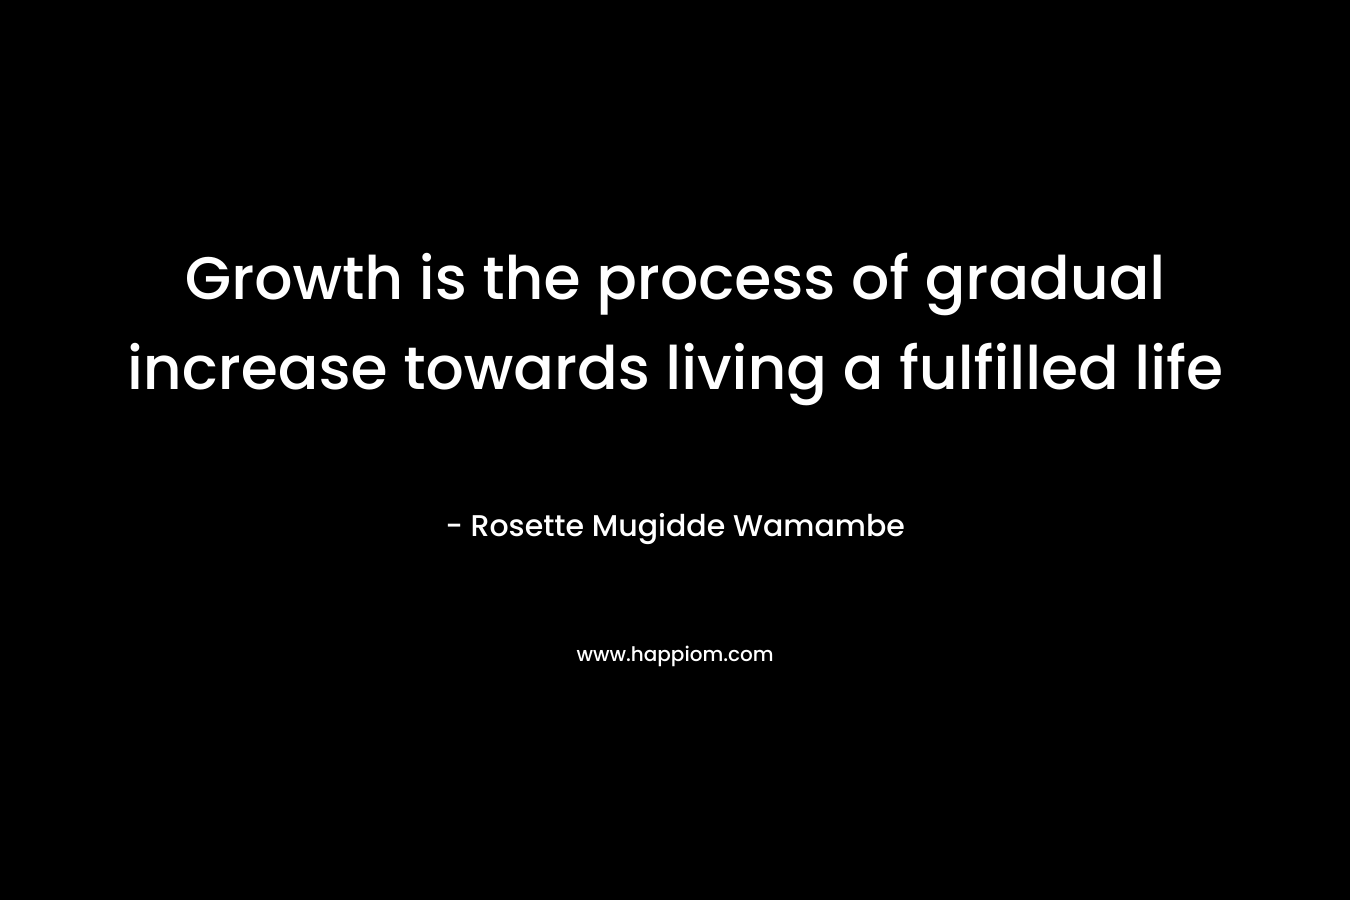 Growth is the process of gradual increase towards living a fulfilled life – Rosette Mugidde Wamambe